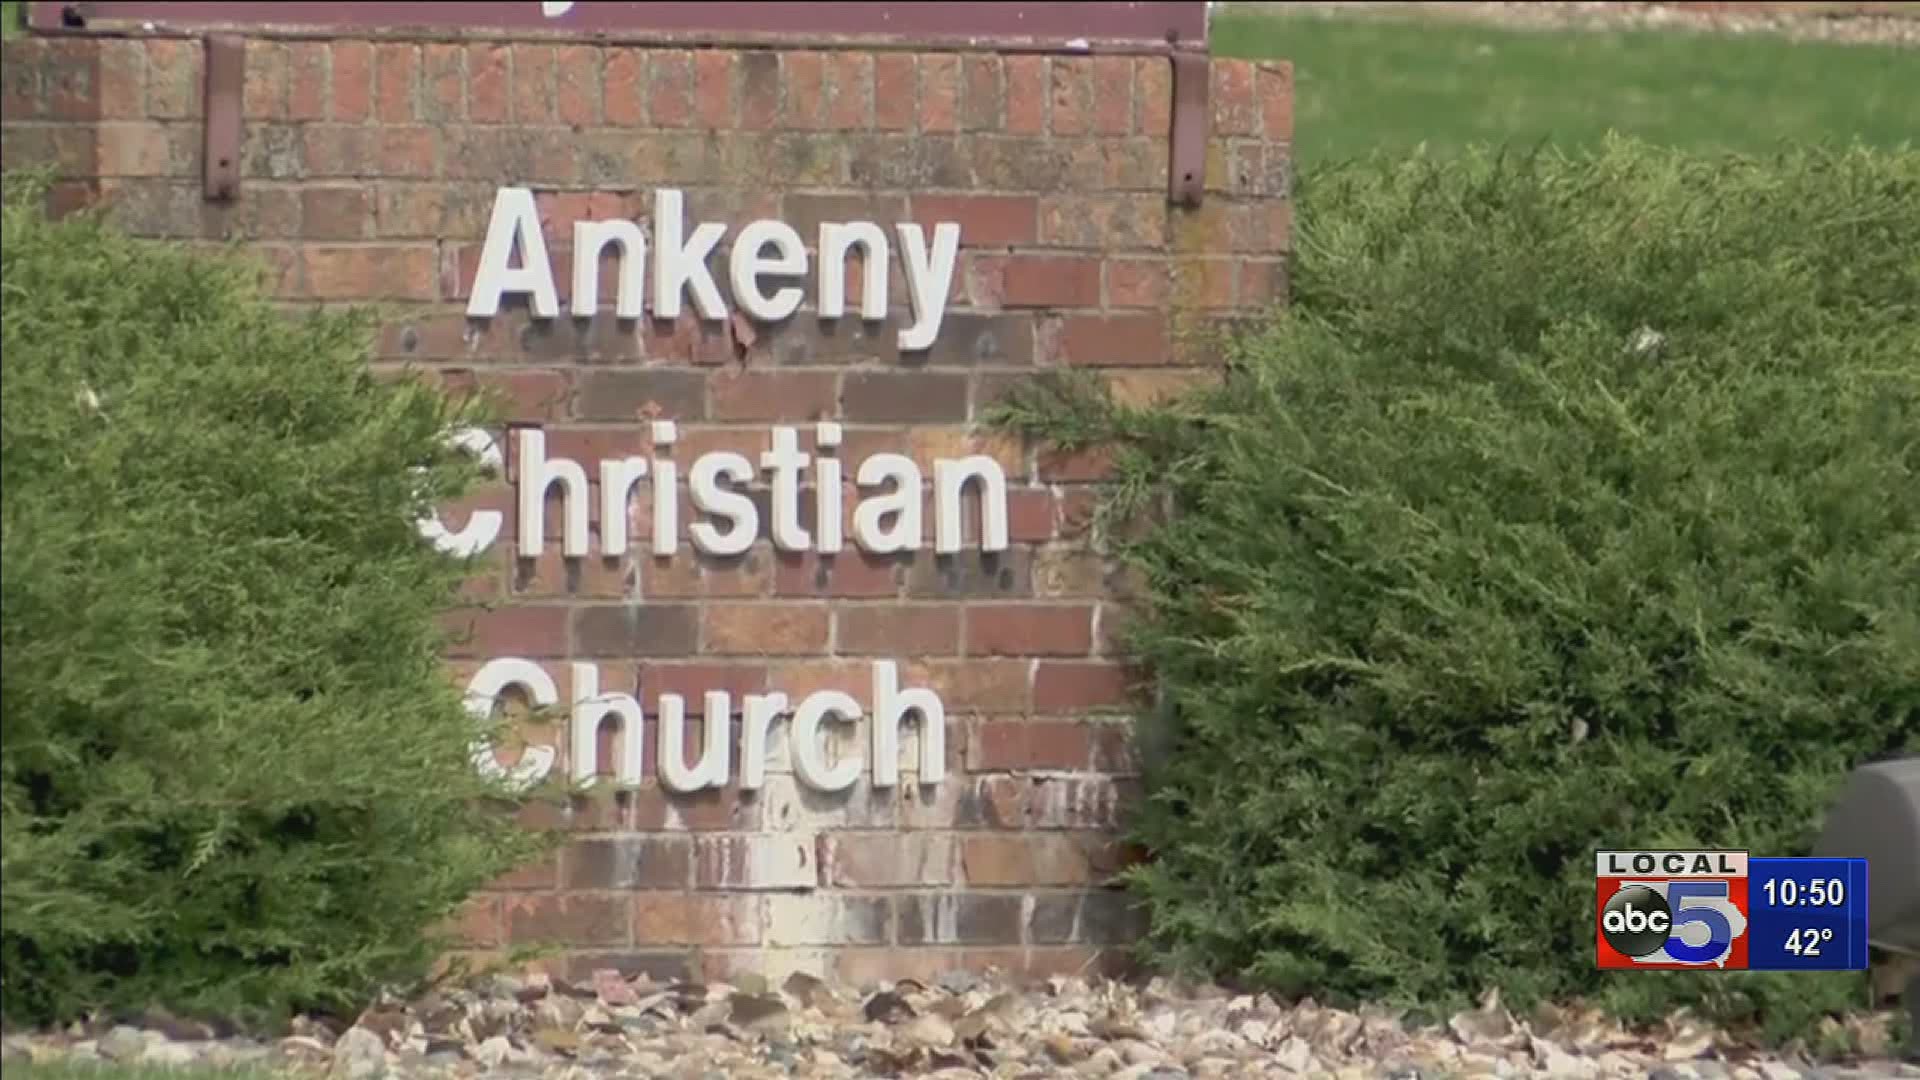 Ankeny Christian Church has a Palm Sunday parade every year. They had to make some changes this year, but they didn't let COVID-19 get in the way of tradition.